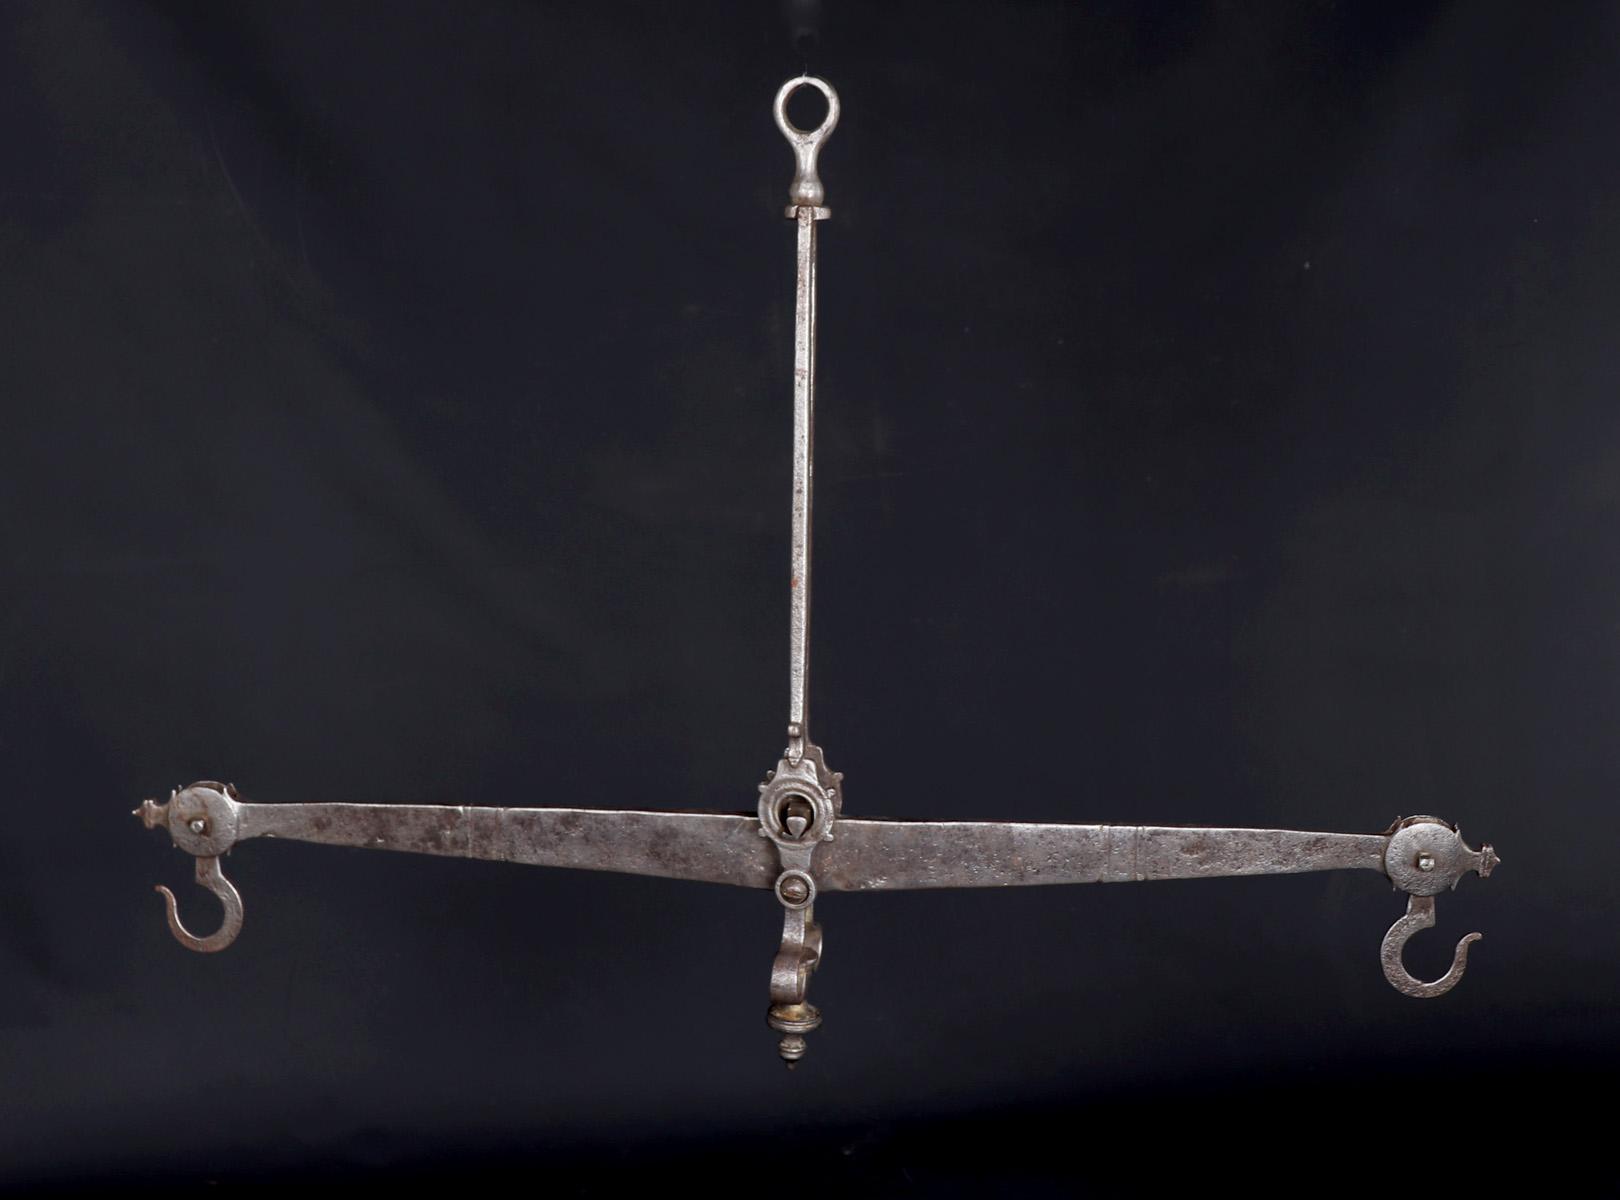 Antique Colonial Wrought Iron Scale, 18th C.